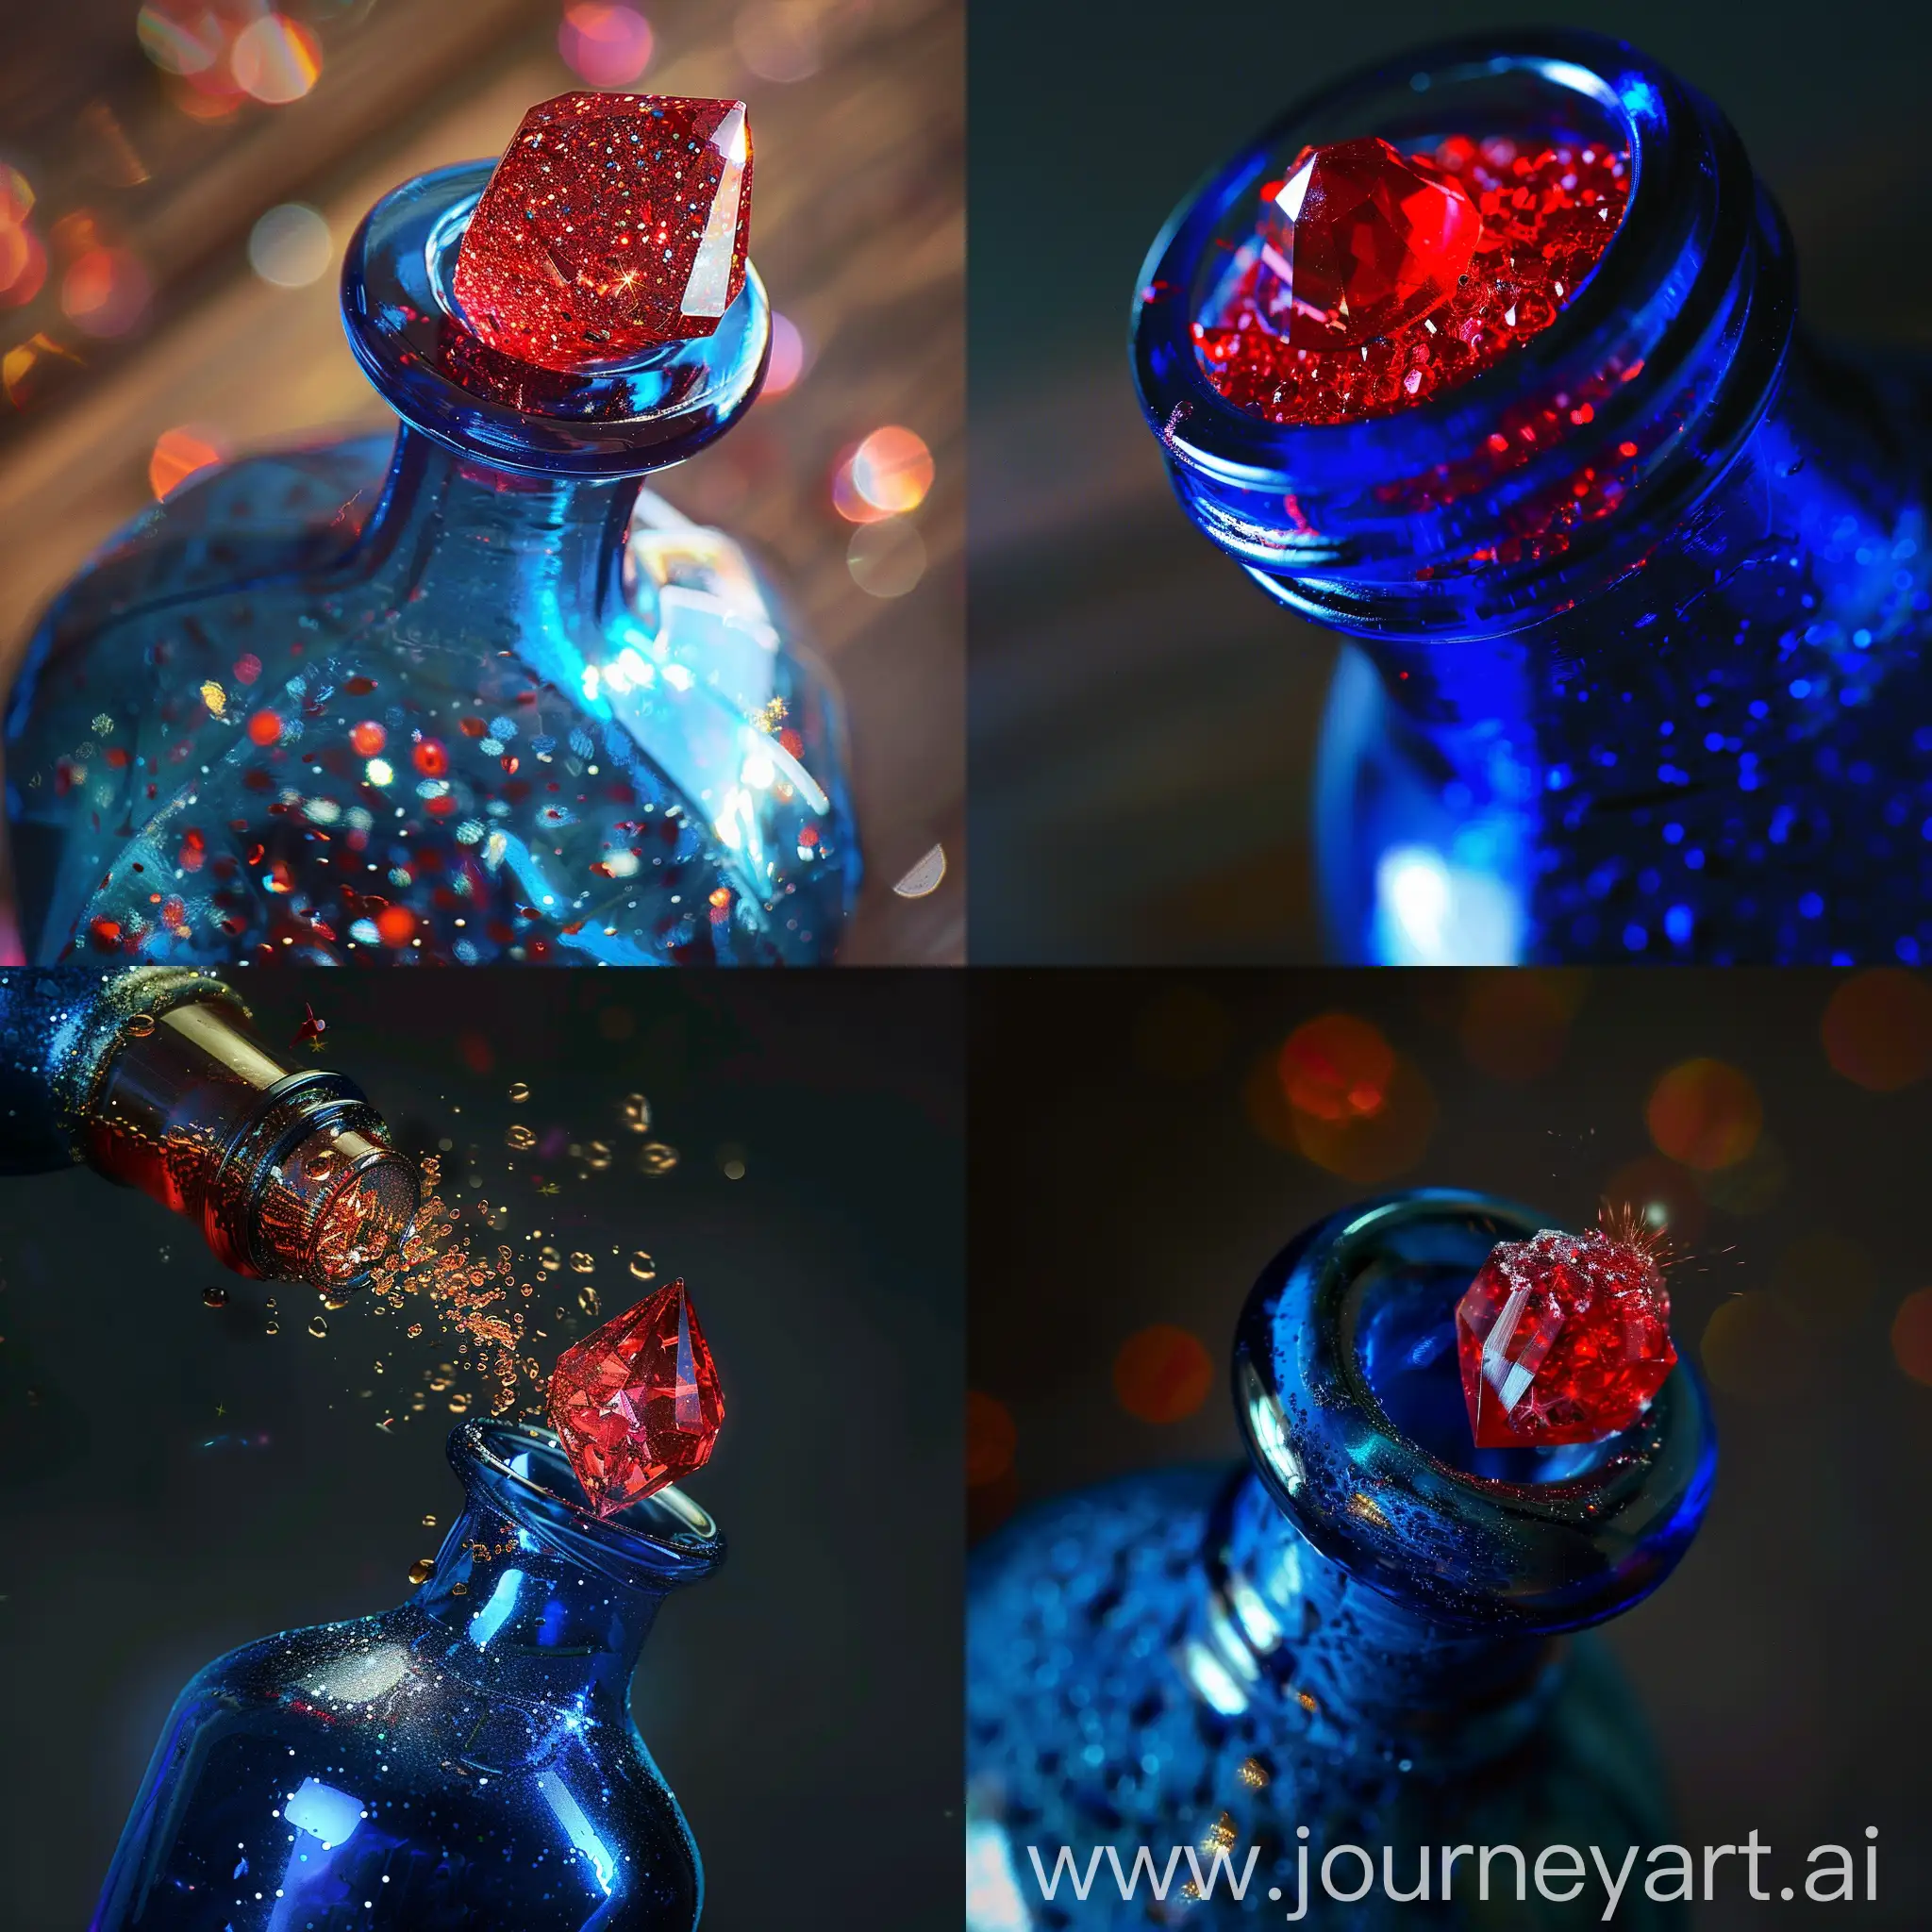 Magical-Red-Gem-at-the-Mouth-of-a-Blue-Bottle